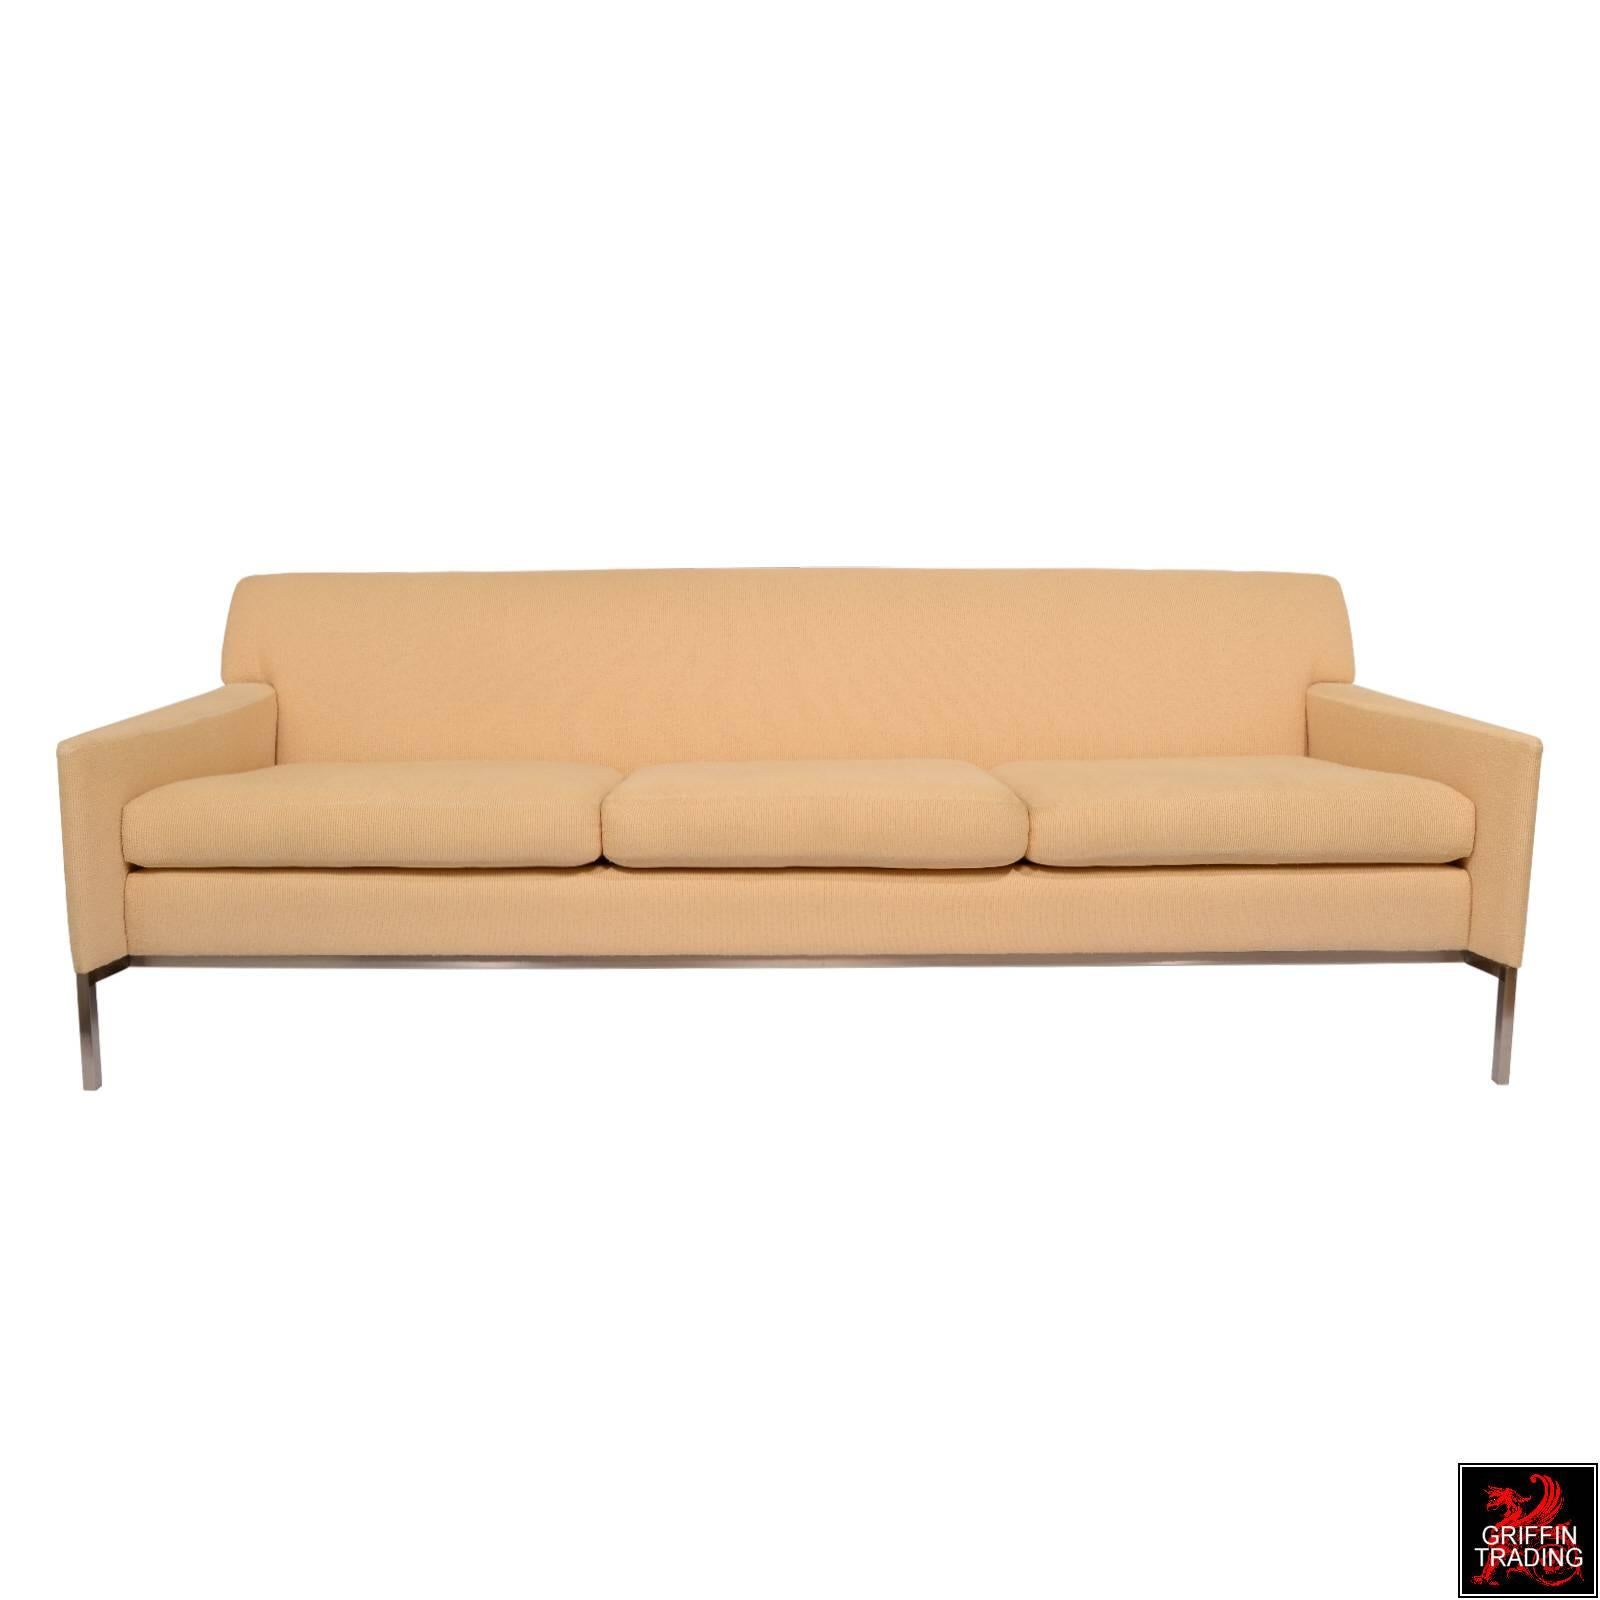 Fine design meets the finest quality. These luxurious sofas are extremely comfortable and perfect for residential or commercial use. The streamline design and appearance of these sofas are the work of designer Stanley Jay Friedman. Friedman designed